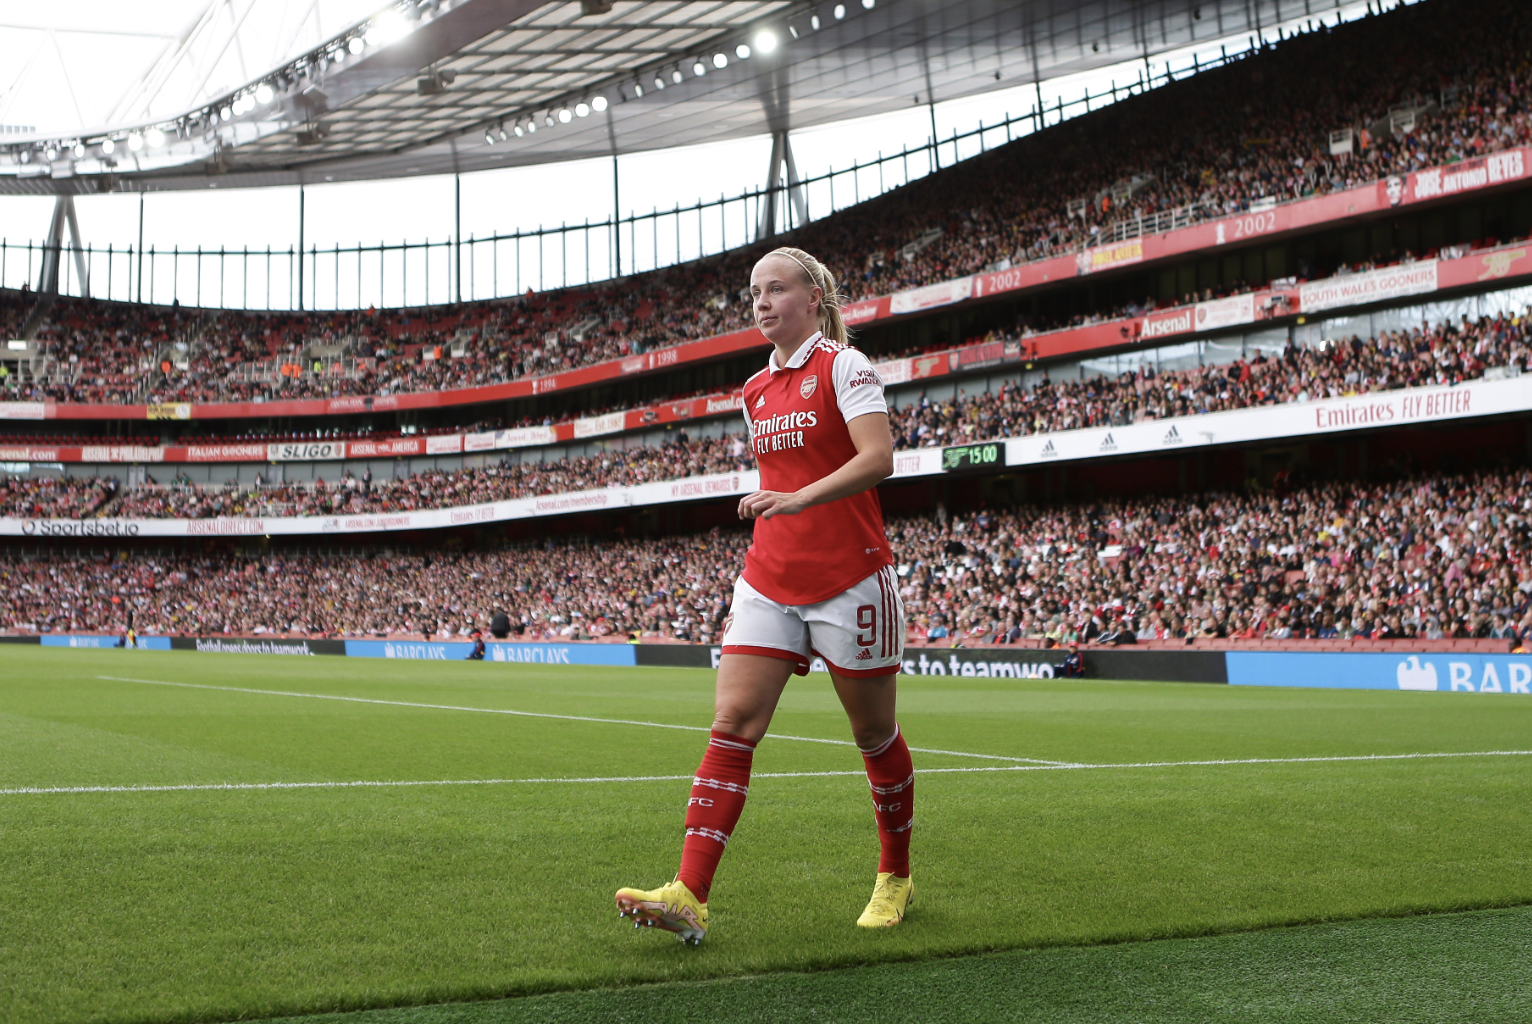 Analysis: Mead and Russo on the scoresheet against Leicester at Emirates Stadium